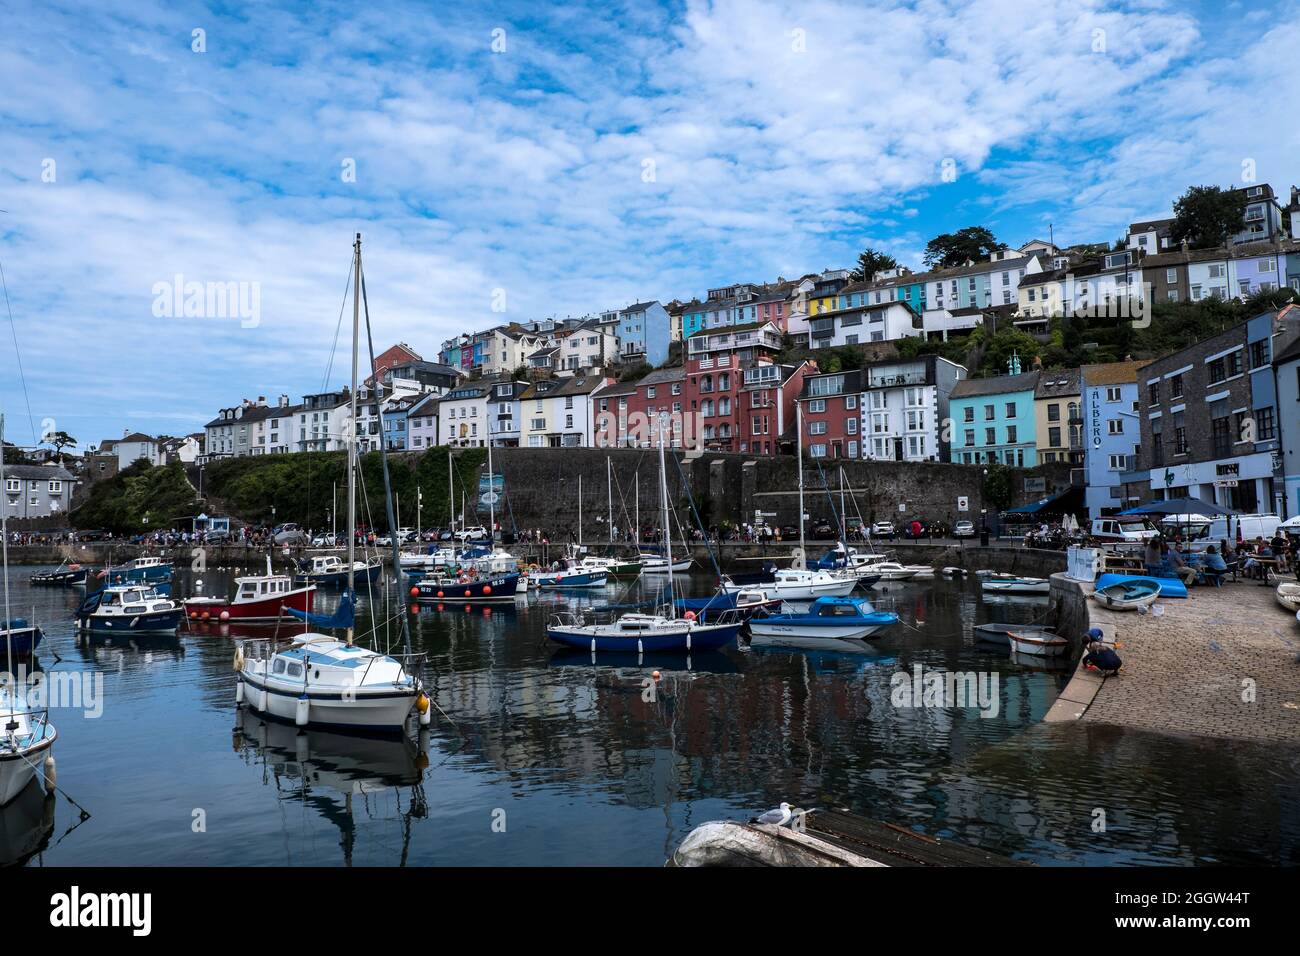 A view of the harbour and houses in Brixham, Devon Stock Photo